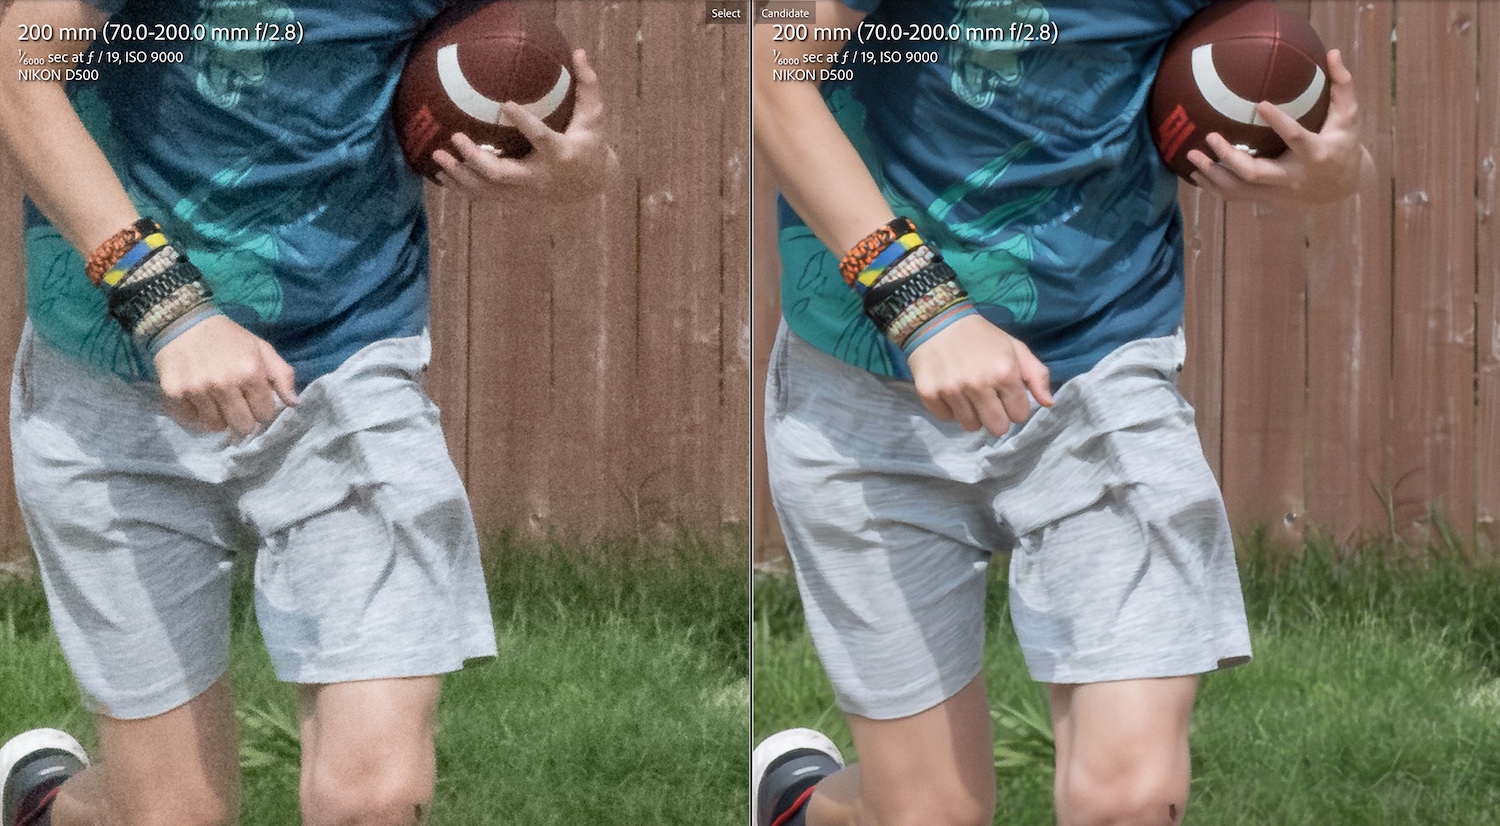 Lightroom's AI-Powered Denoise Feature: close-up of a boy holding a football